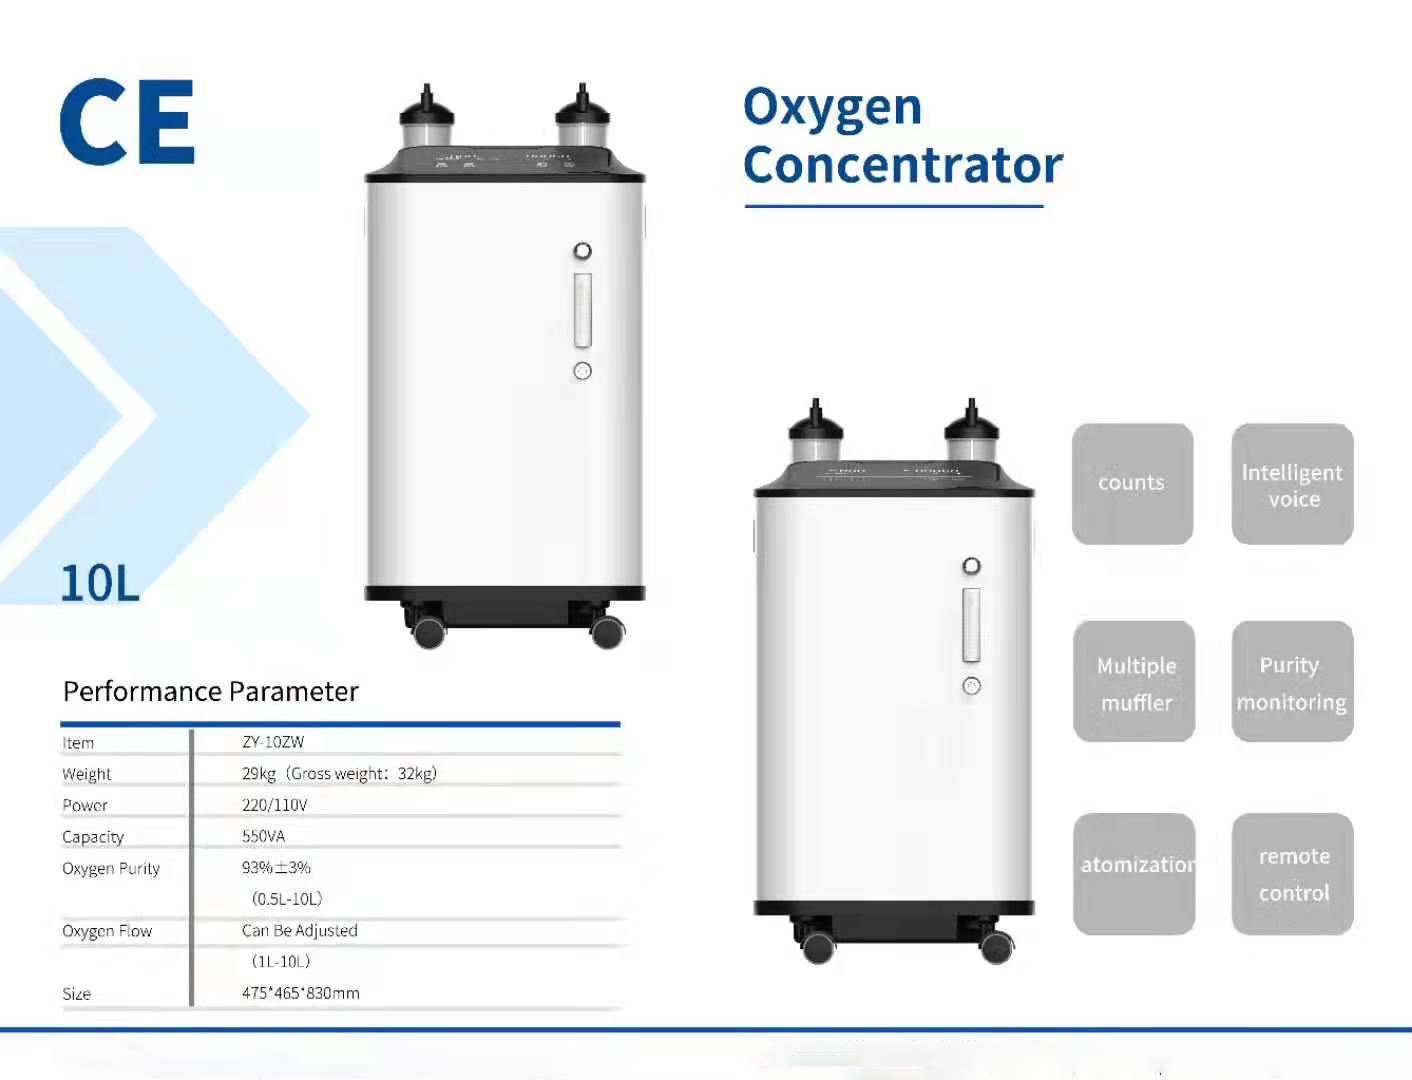 Introduction of Hico Oxygen Concentrator Project